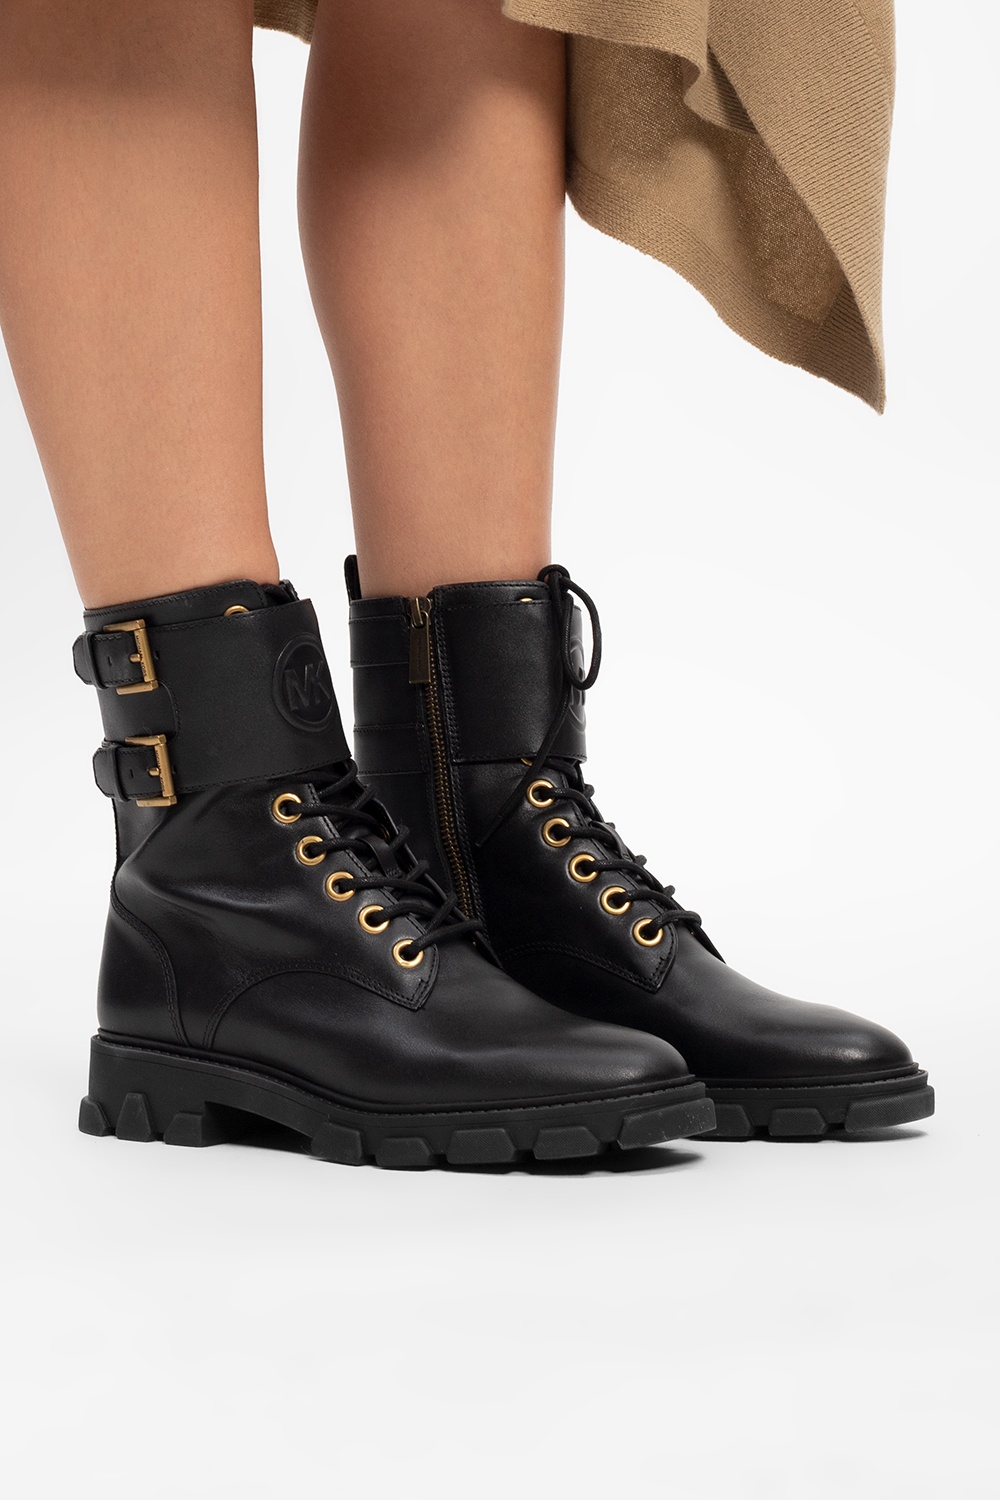 michael by michael kors boots